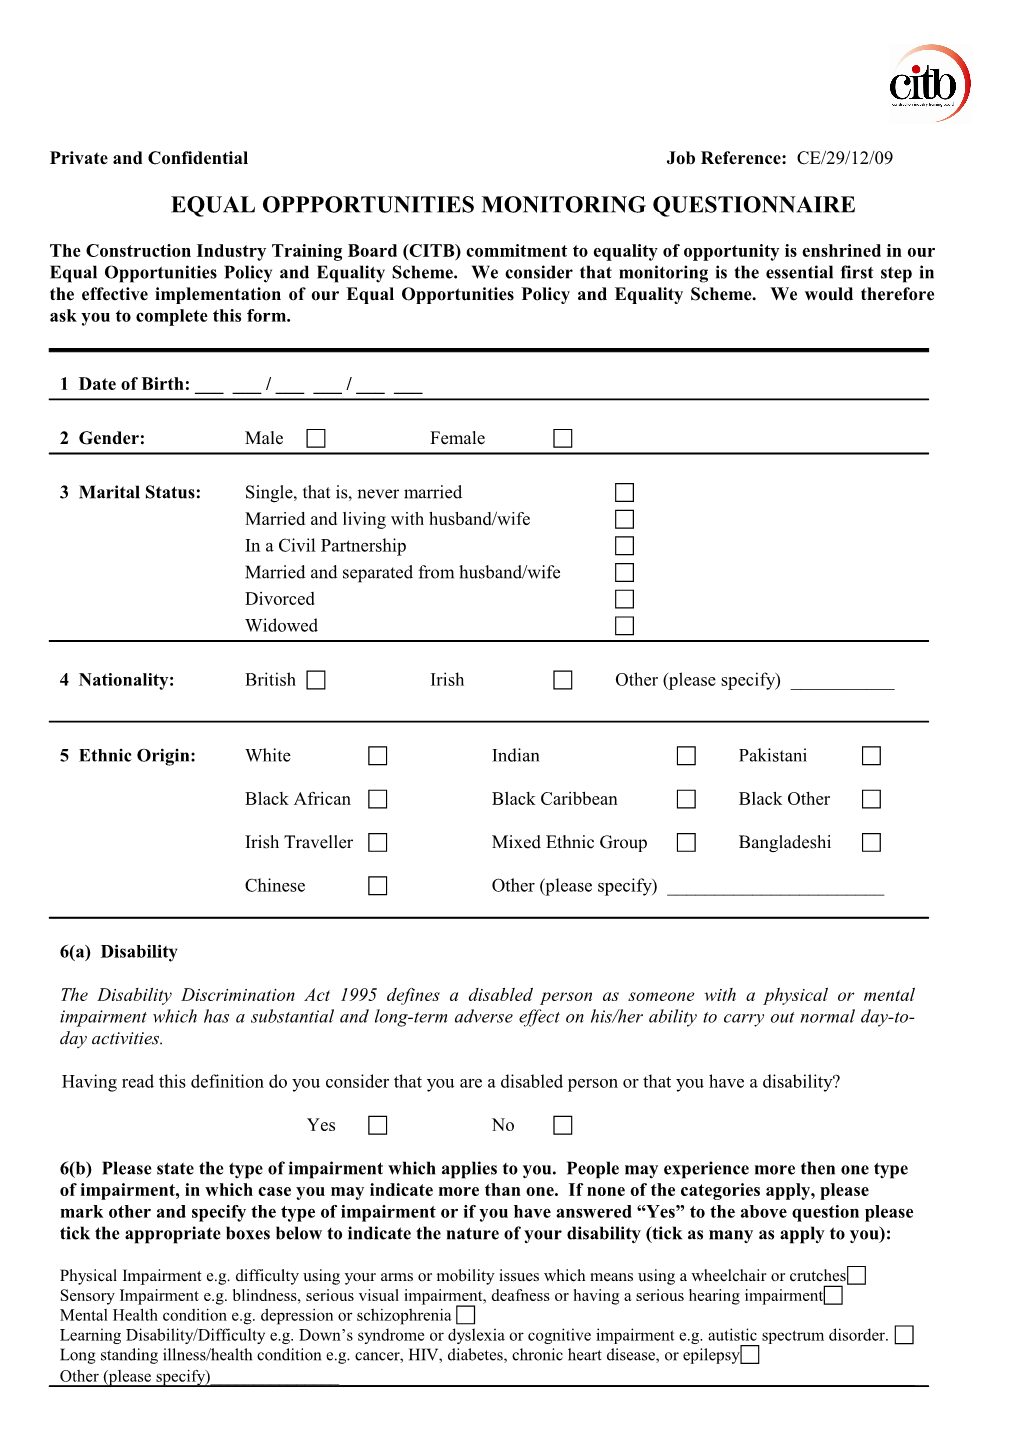 Equal Oppportunities Monitoring Questionnaire